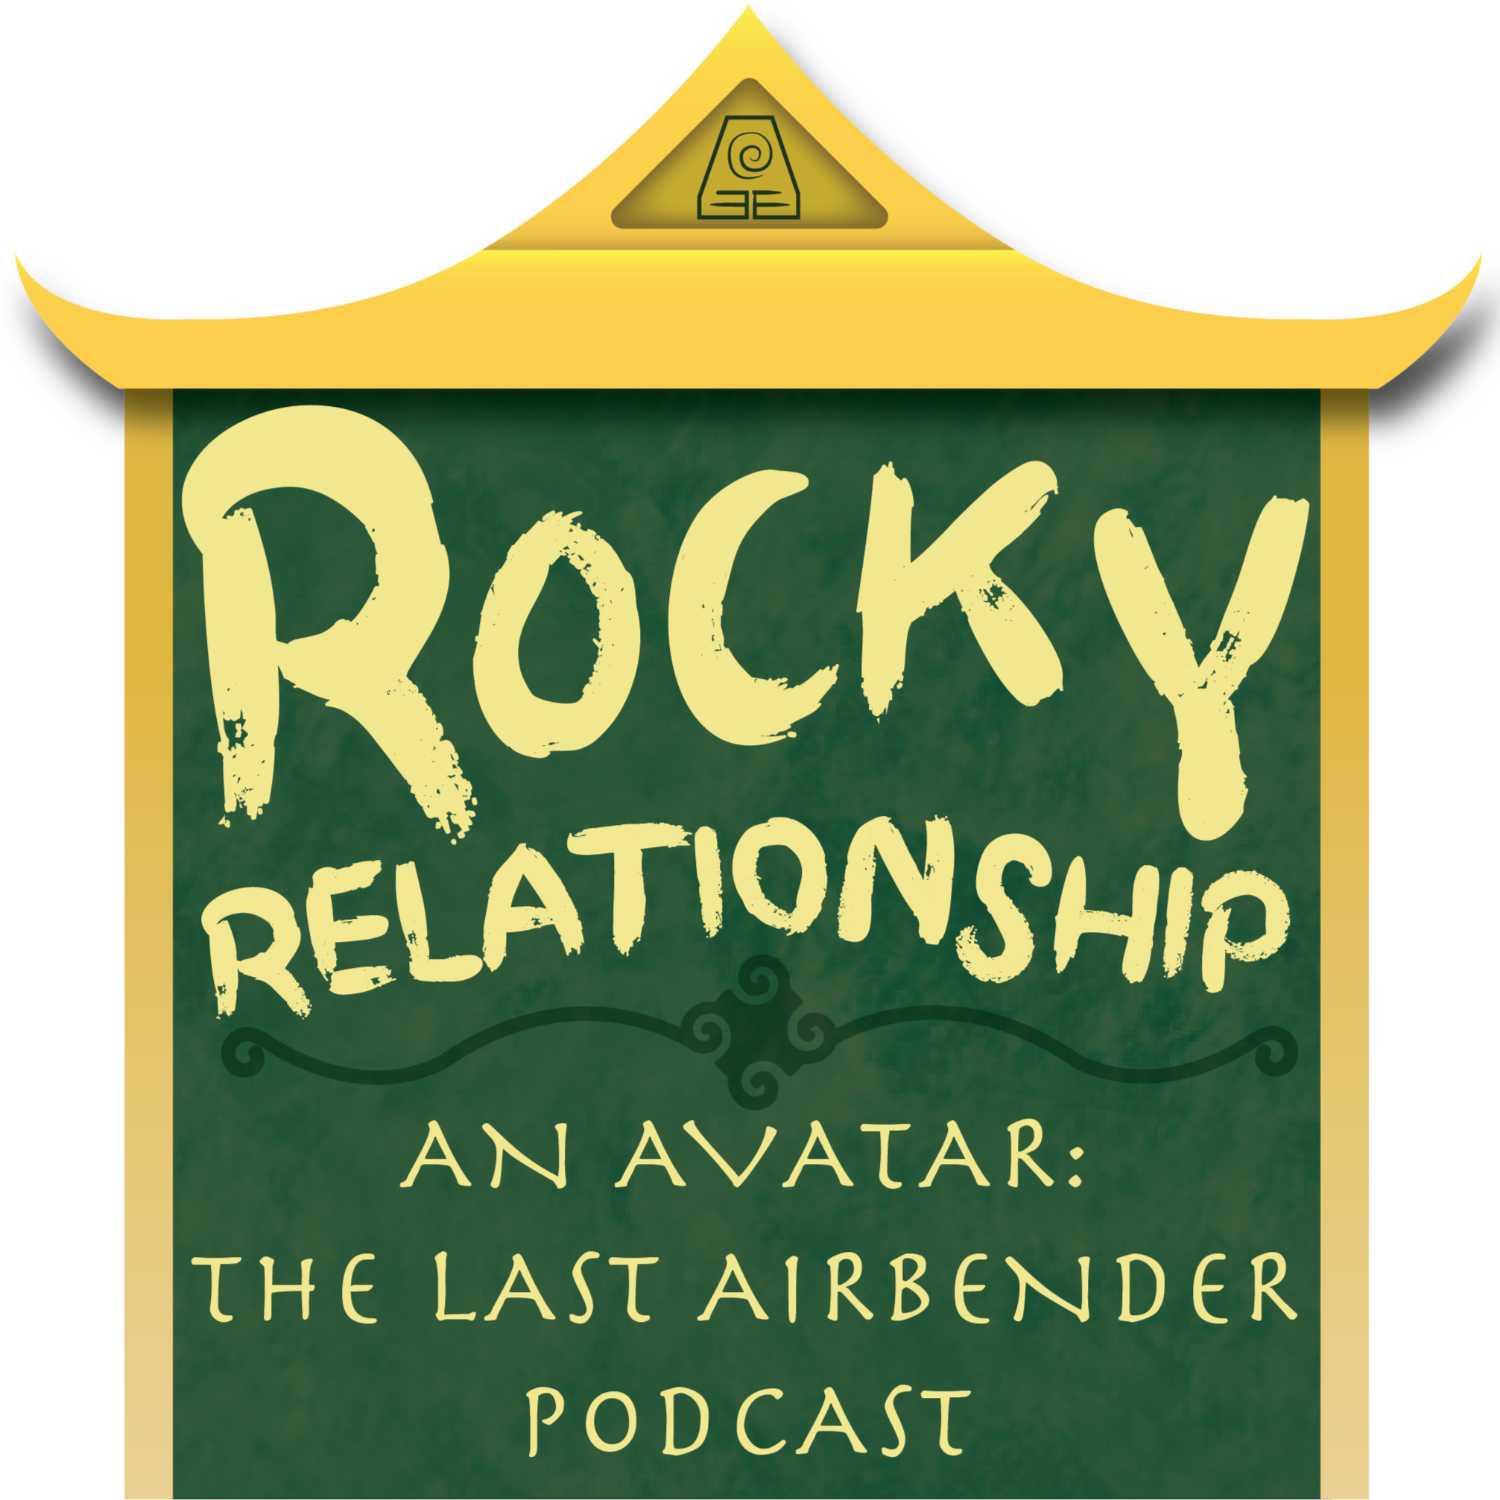 Rocky Relationship - An Avatar: The Last Airbender Podcast